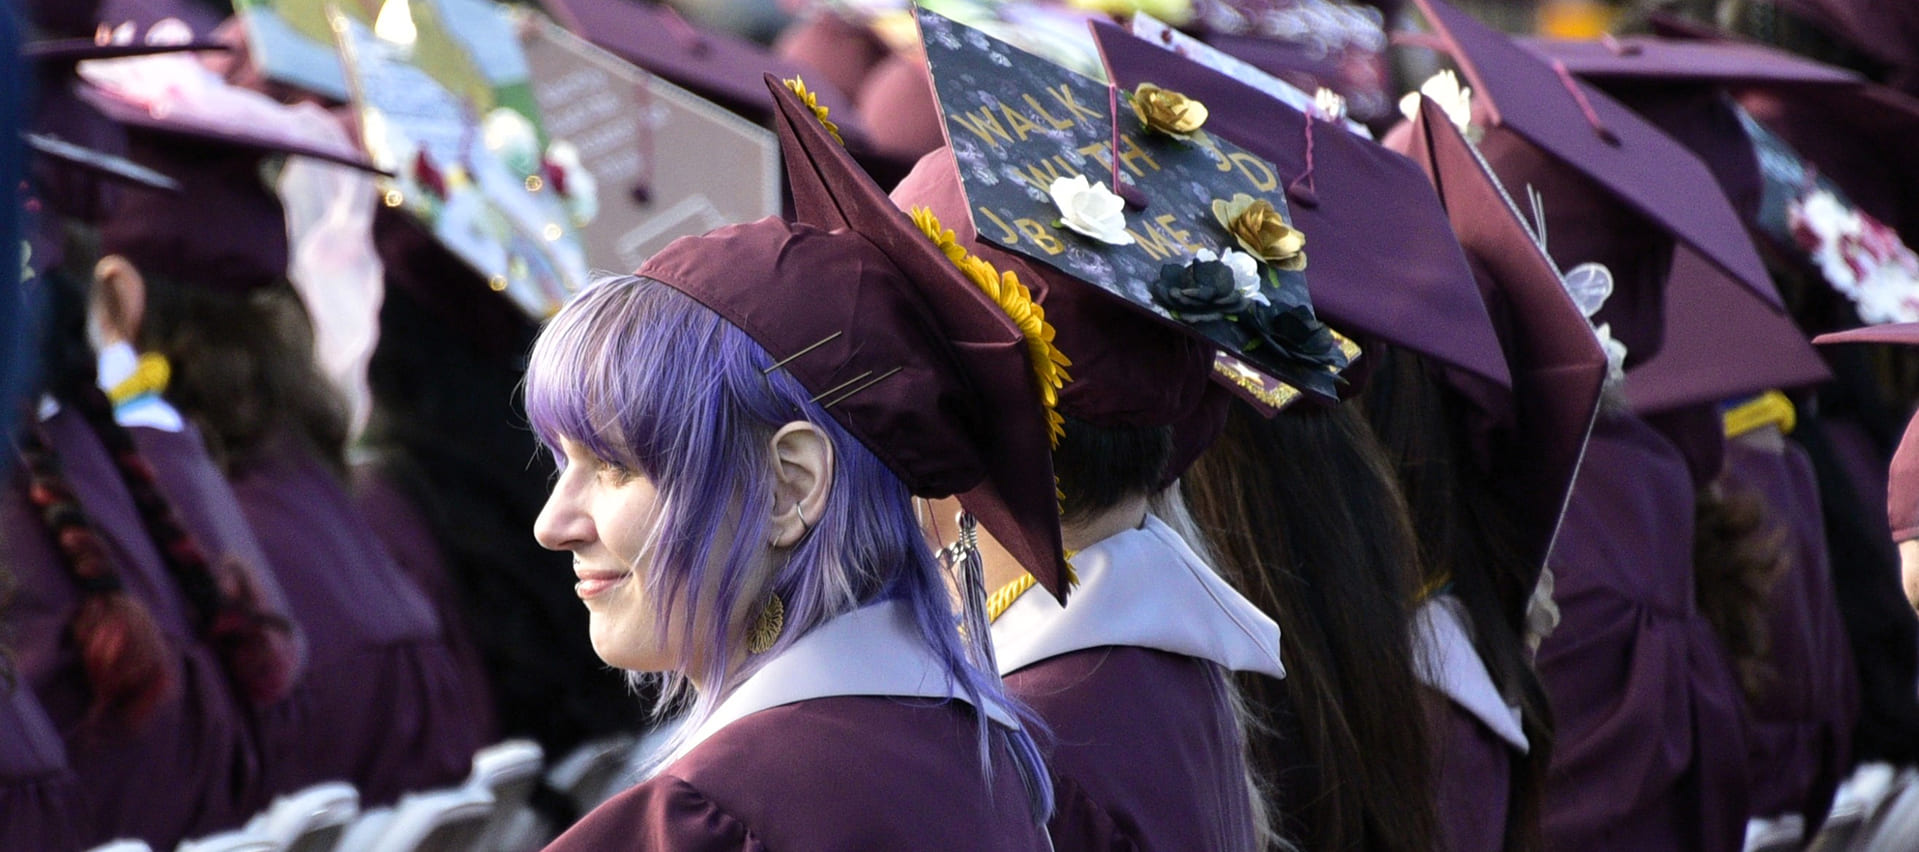 Up close photograph of graduates sitting during commencement in their caps and gowns